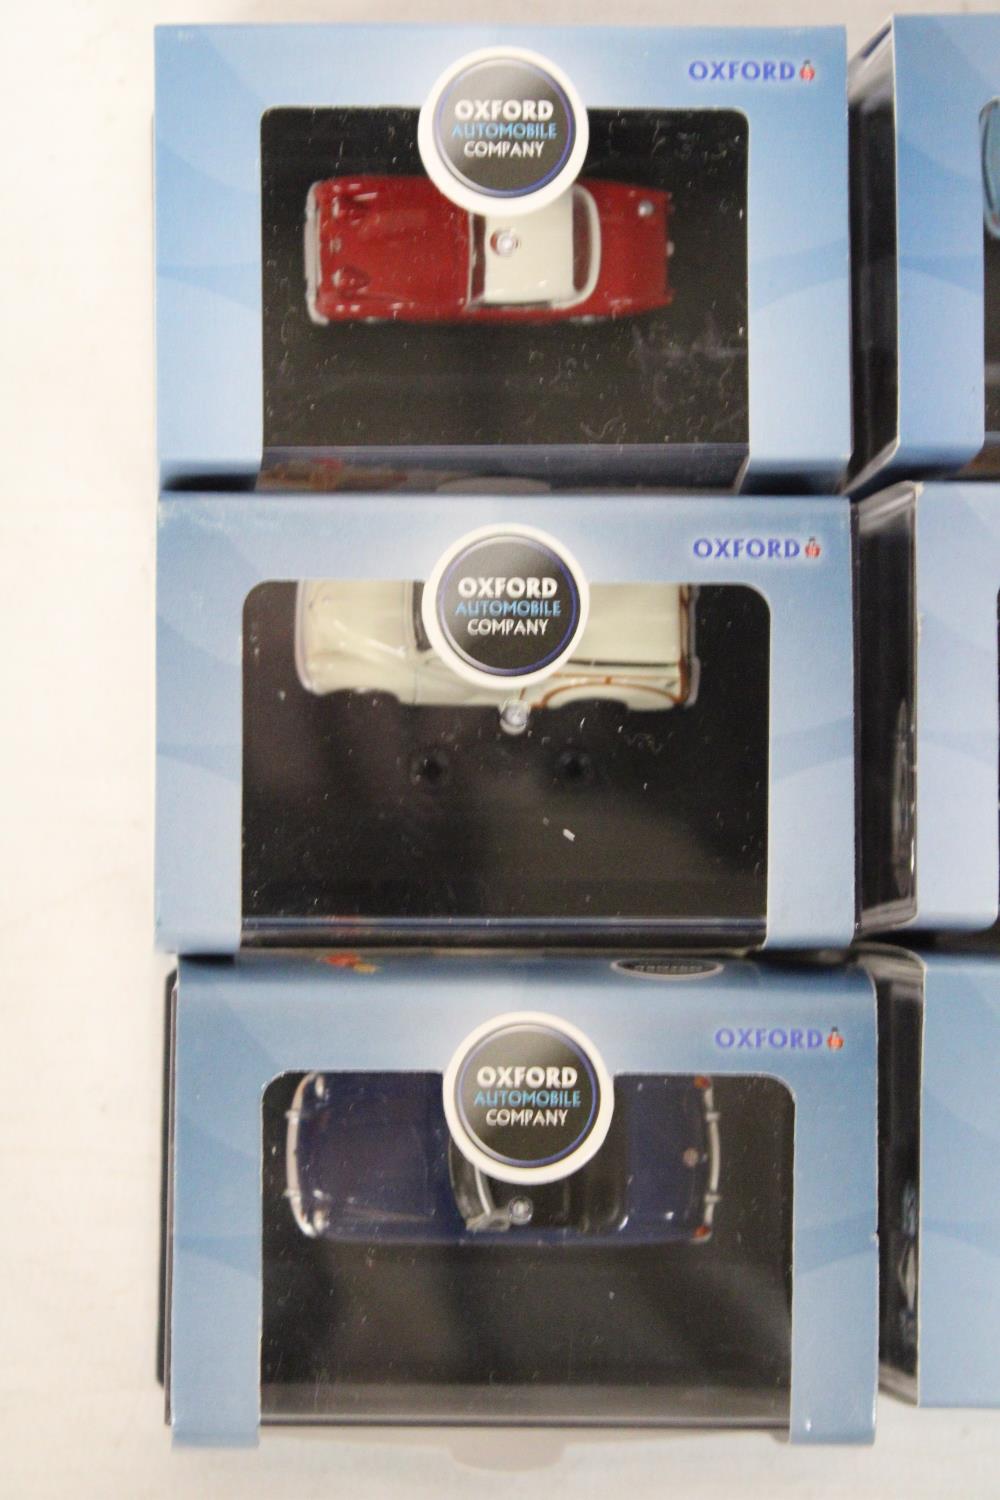 SIX VARIOUS AS NEW AND BOXED OXFORD AUTOMOBILE COMPANY VEHICLES - Image 4 of 5